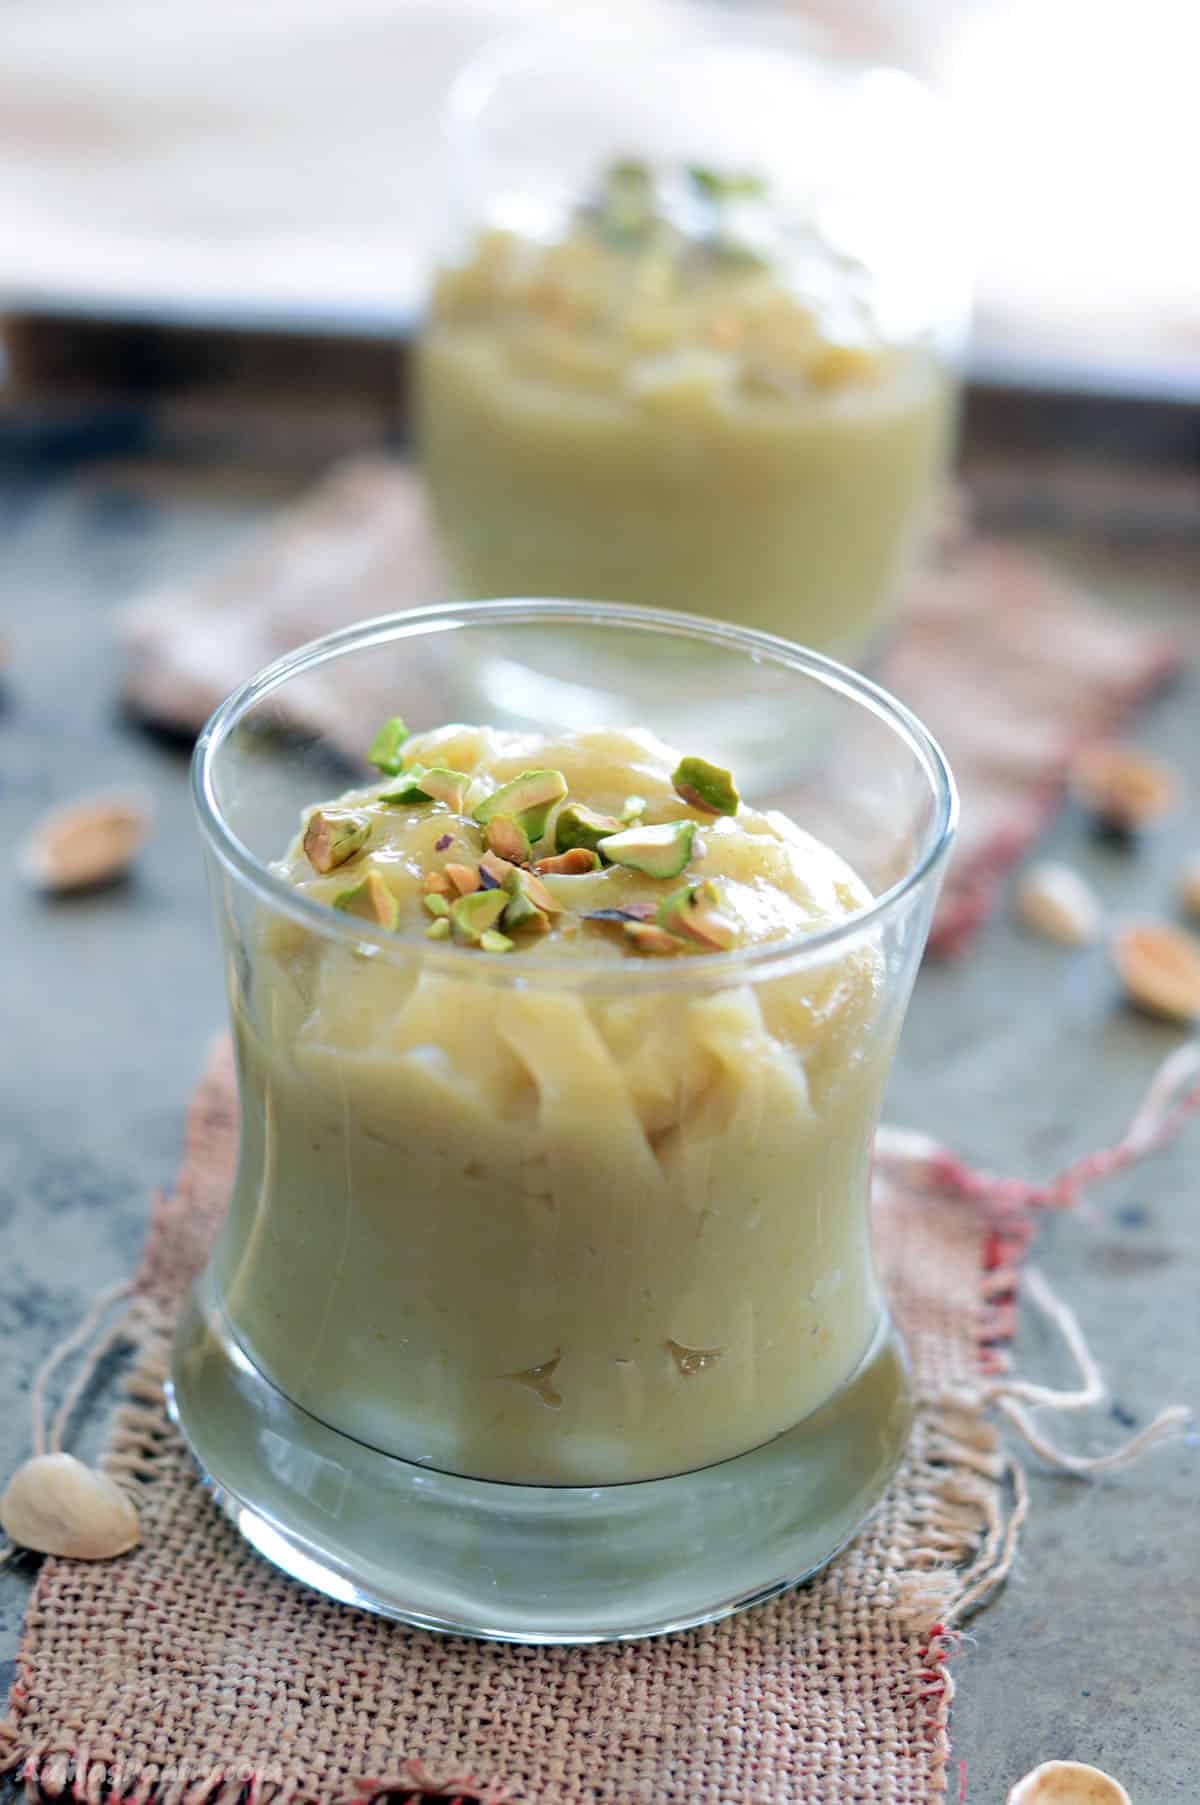 a close look at a cup with pistachio pudding.